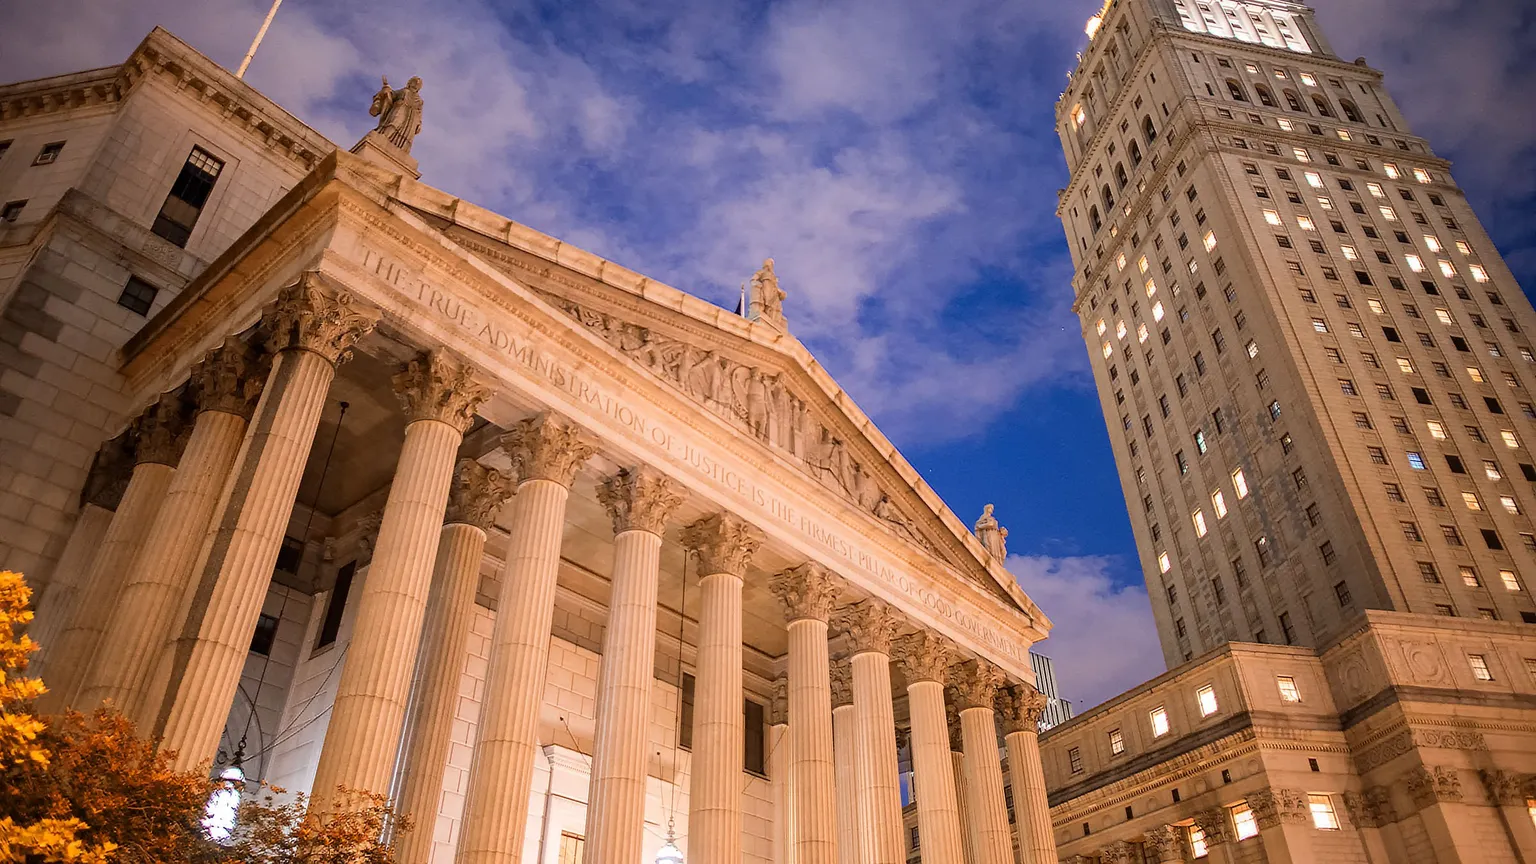 United States District Court building located in New York City. Image: Pisaphotography/Shutterstock